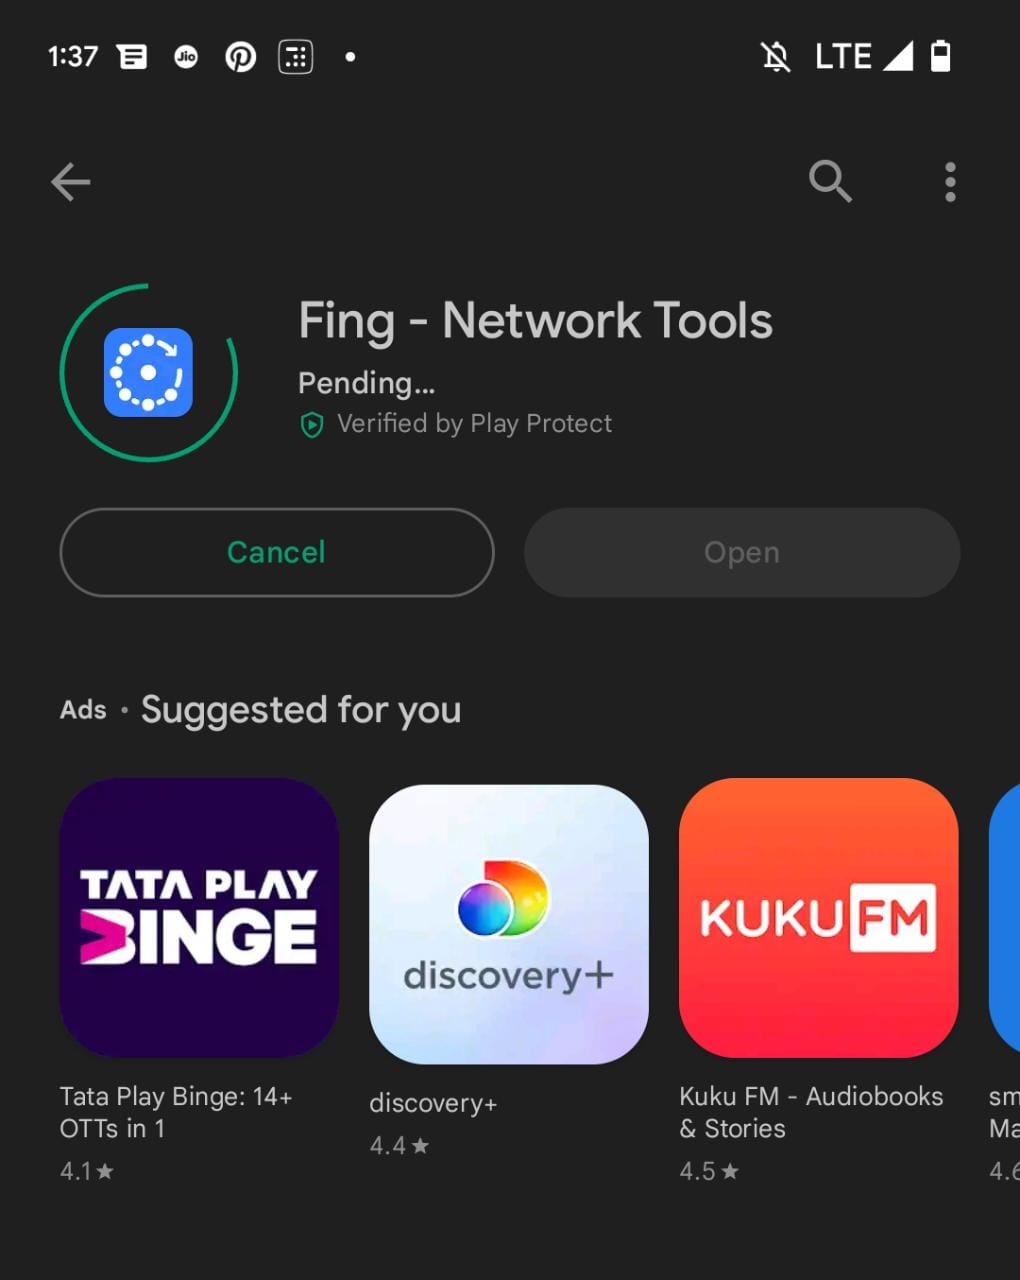 Fing Network tools